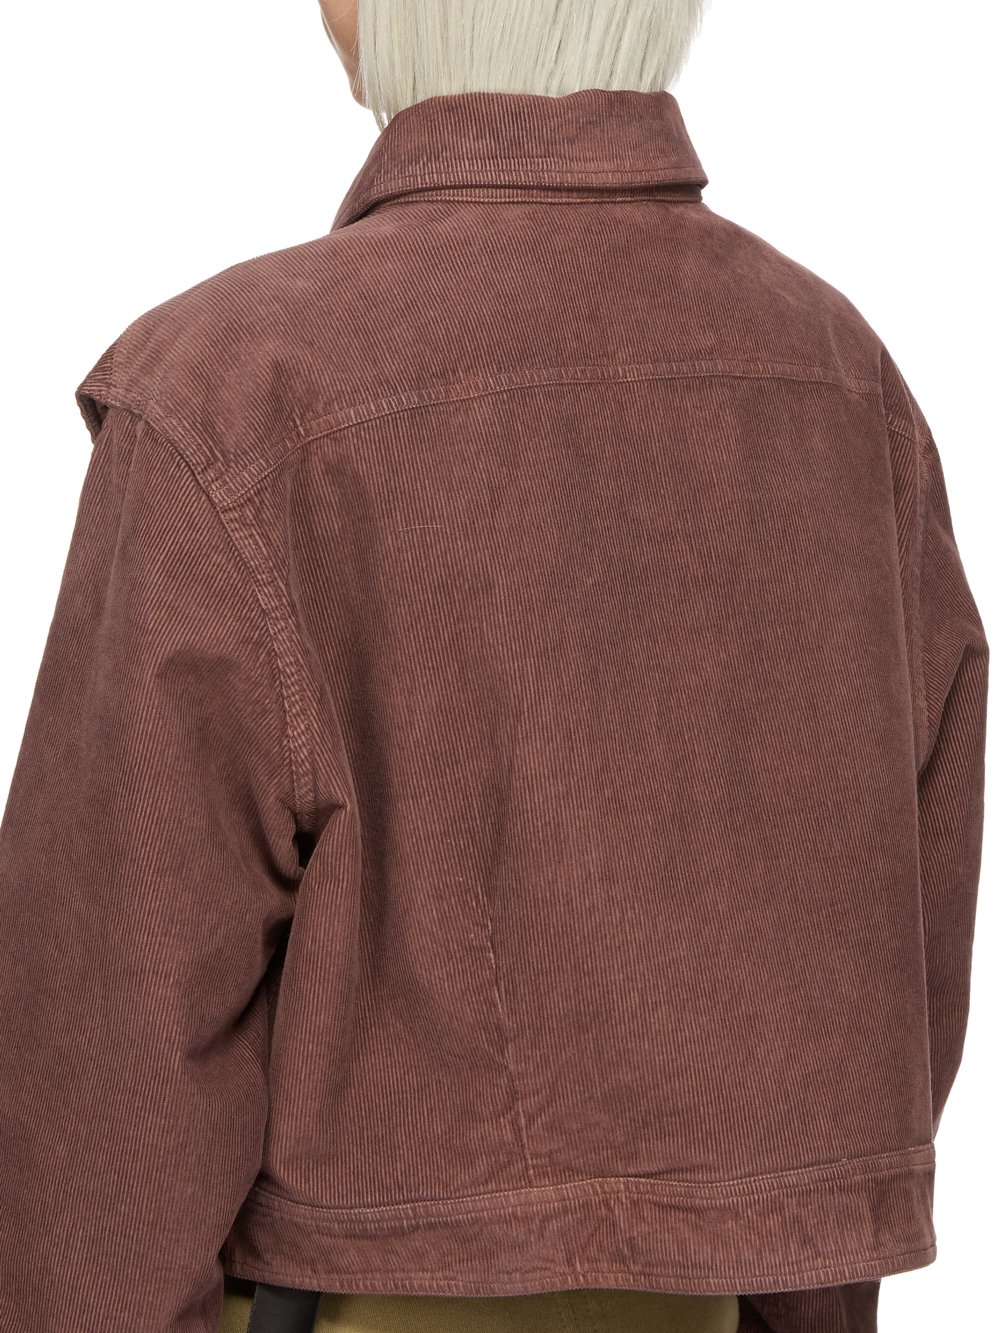 DRKSHDW FW23 LUXOR CAPE SLEEVE CROPPED OUTERSHIRT IN MAUVE COTTON CORDUROY